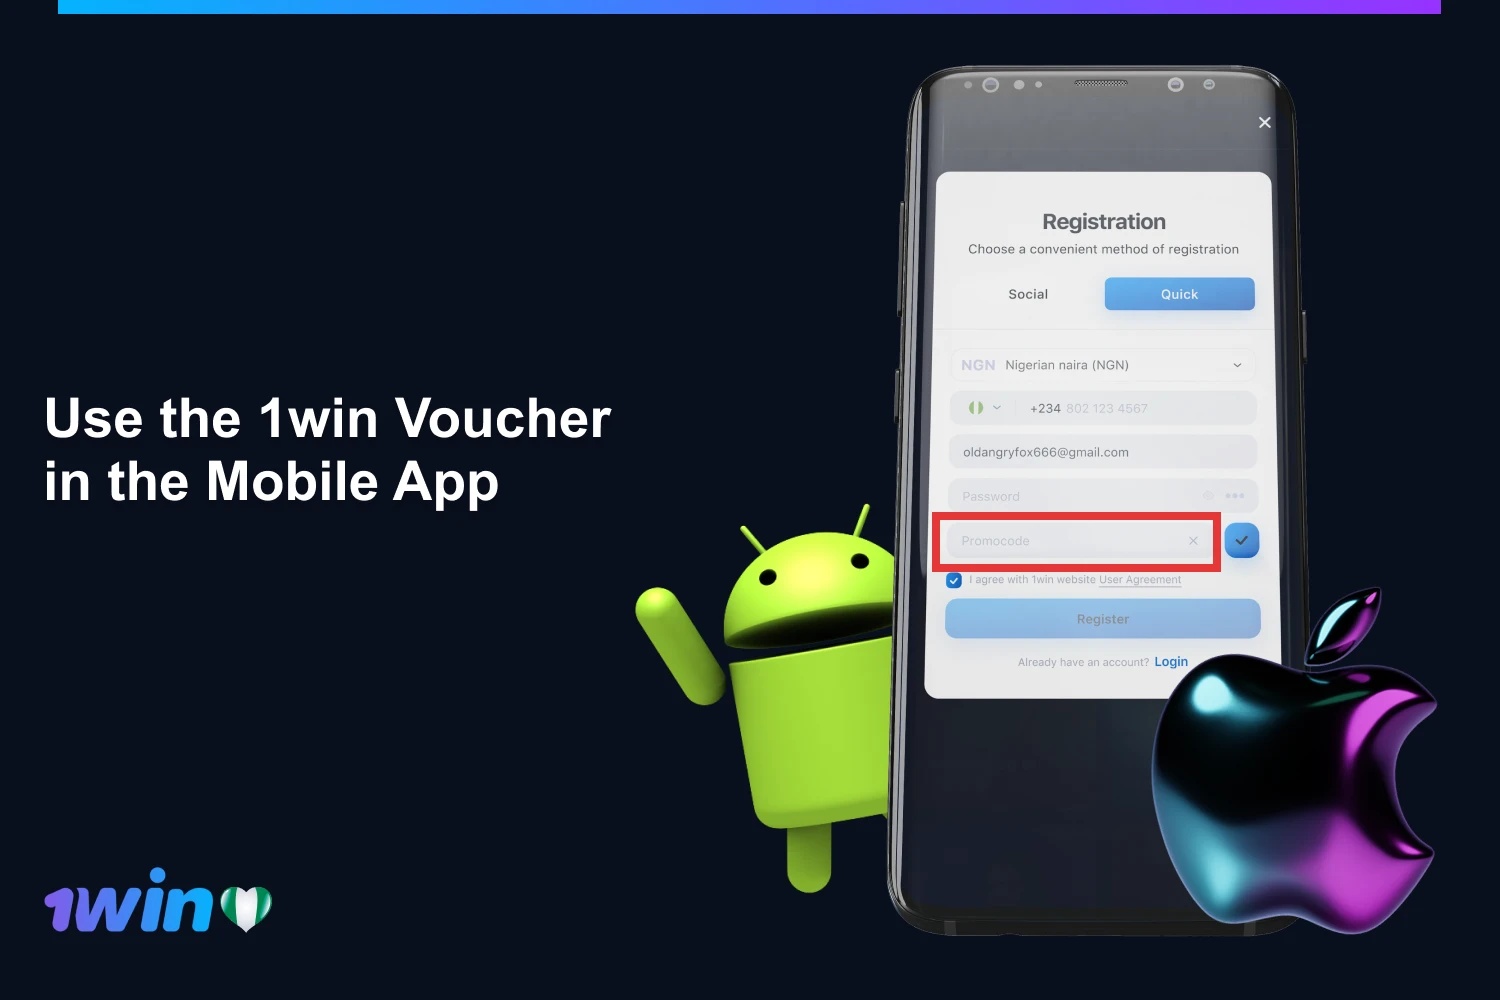 Every Nigerian player can activate a promo code on the 1win app